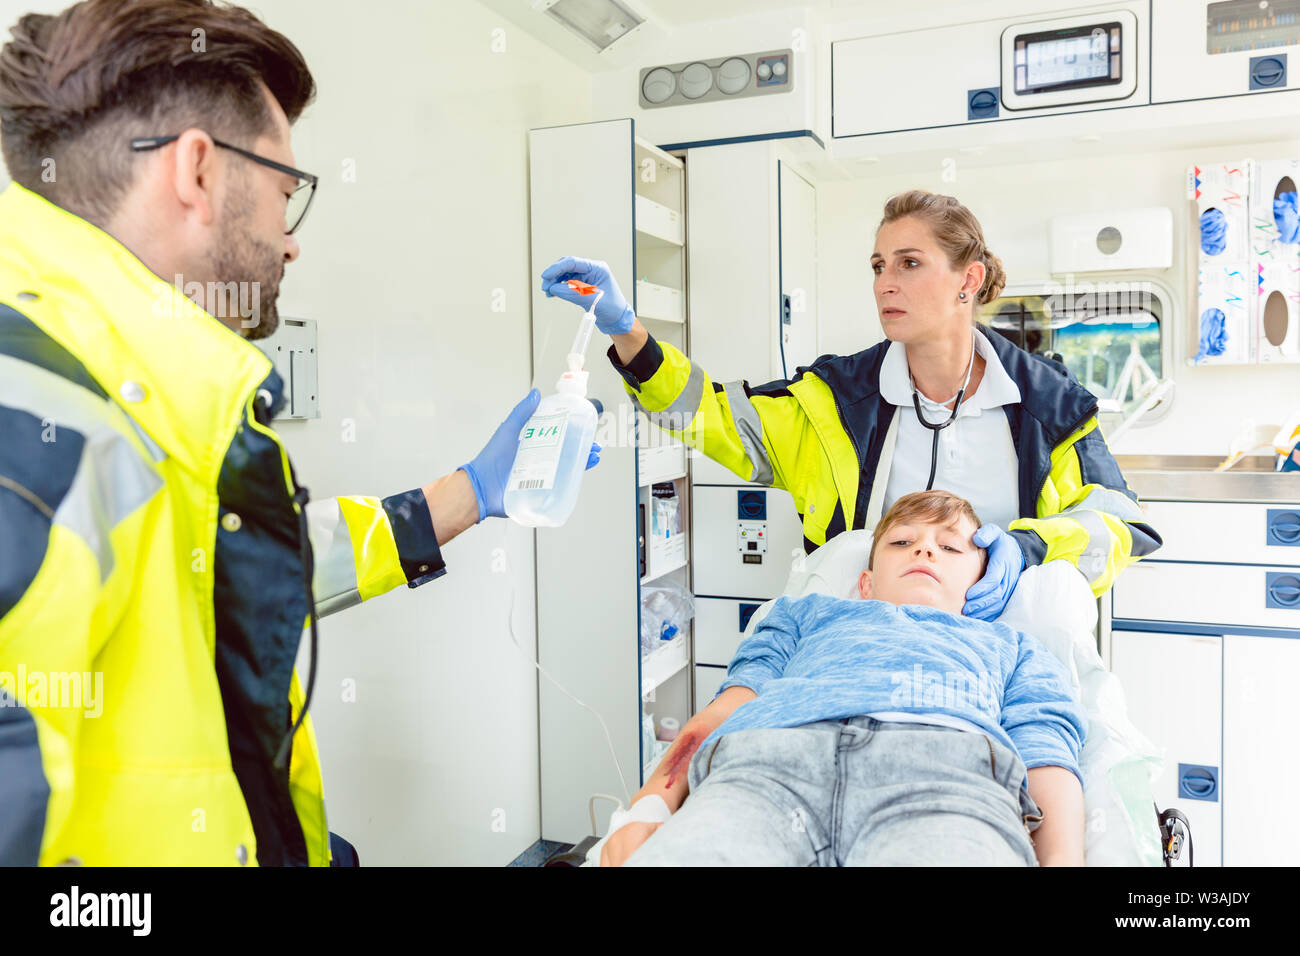 Emergency doctor and paramedic giving infusion in ambulance Stock Photo